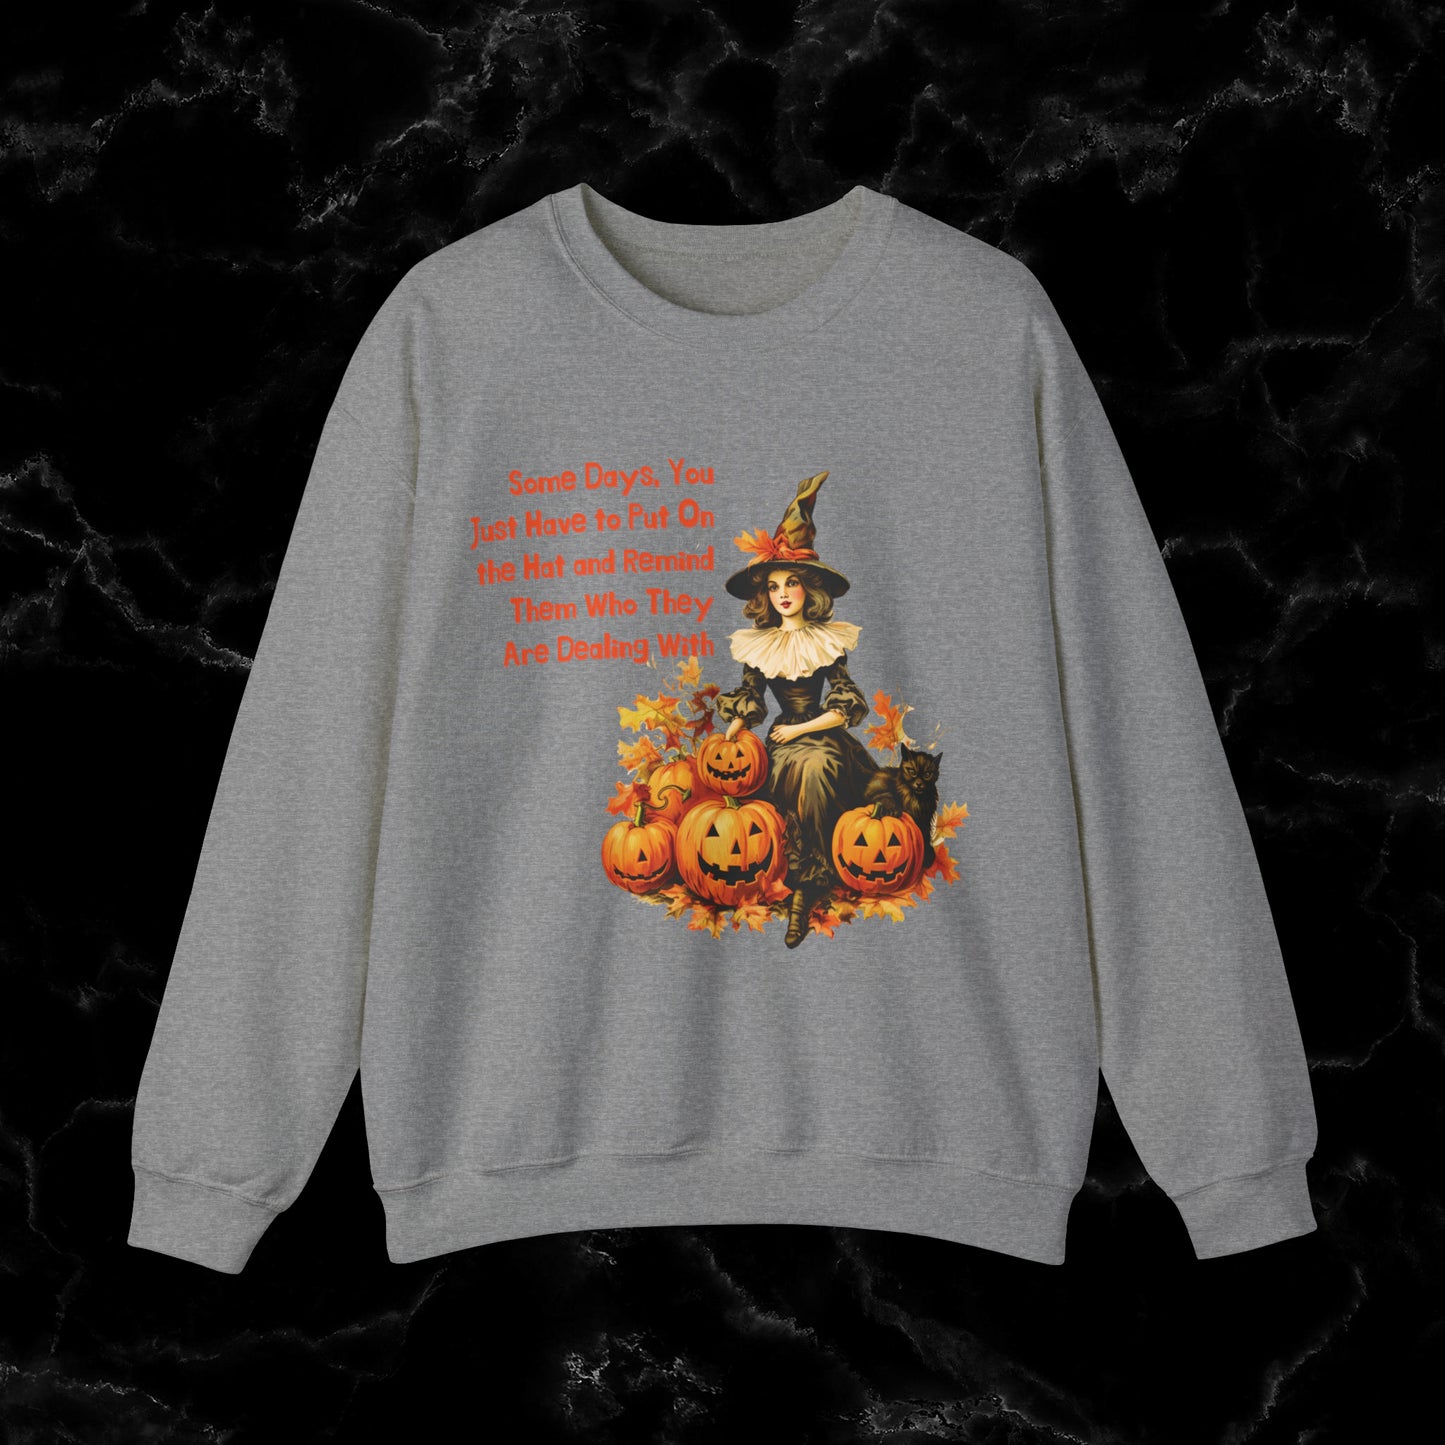 Witch Halloween Gift with Witch Quote - Halloween Sweatshirt - Perfect for Wifes, autunts, Sisters Sweatshirt S Graphite Heather 